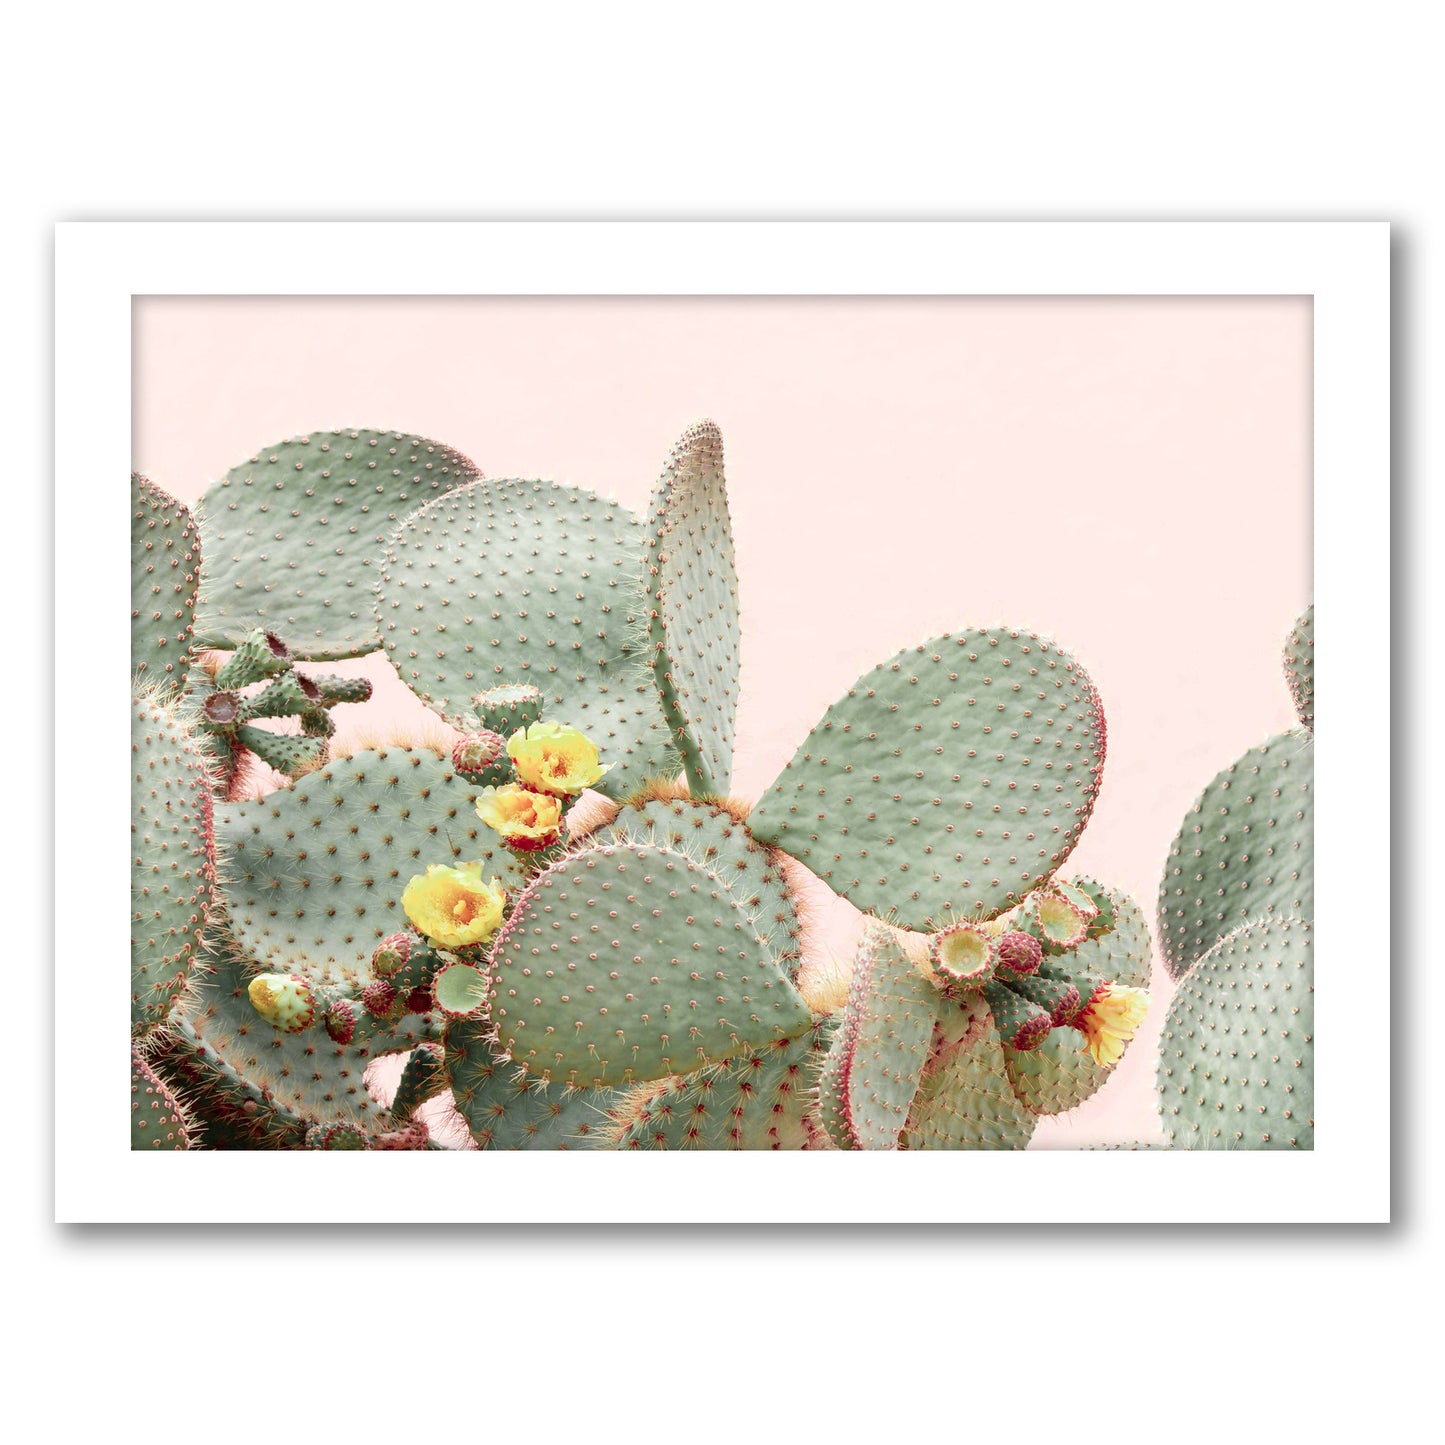 Blooming Cactus  By Sisi And Seb - Framed Print